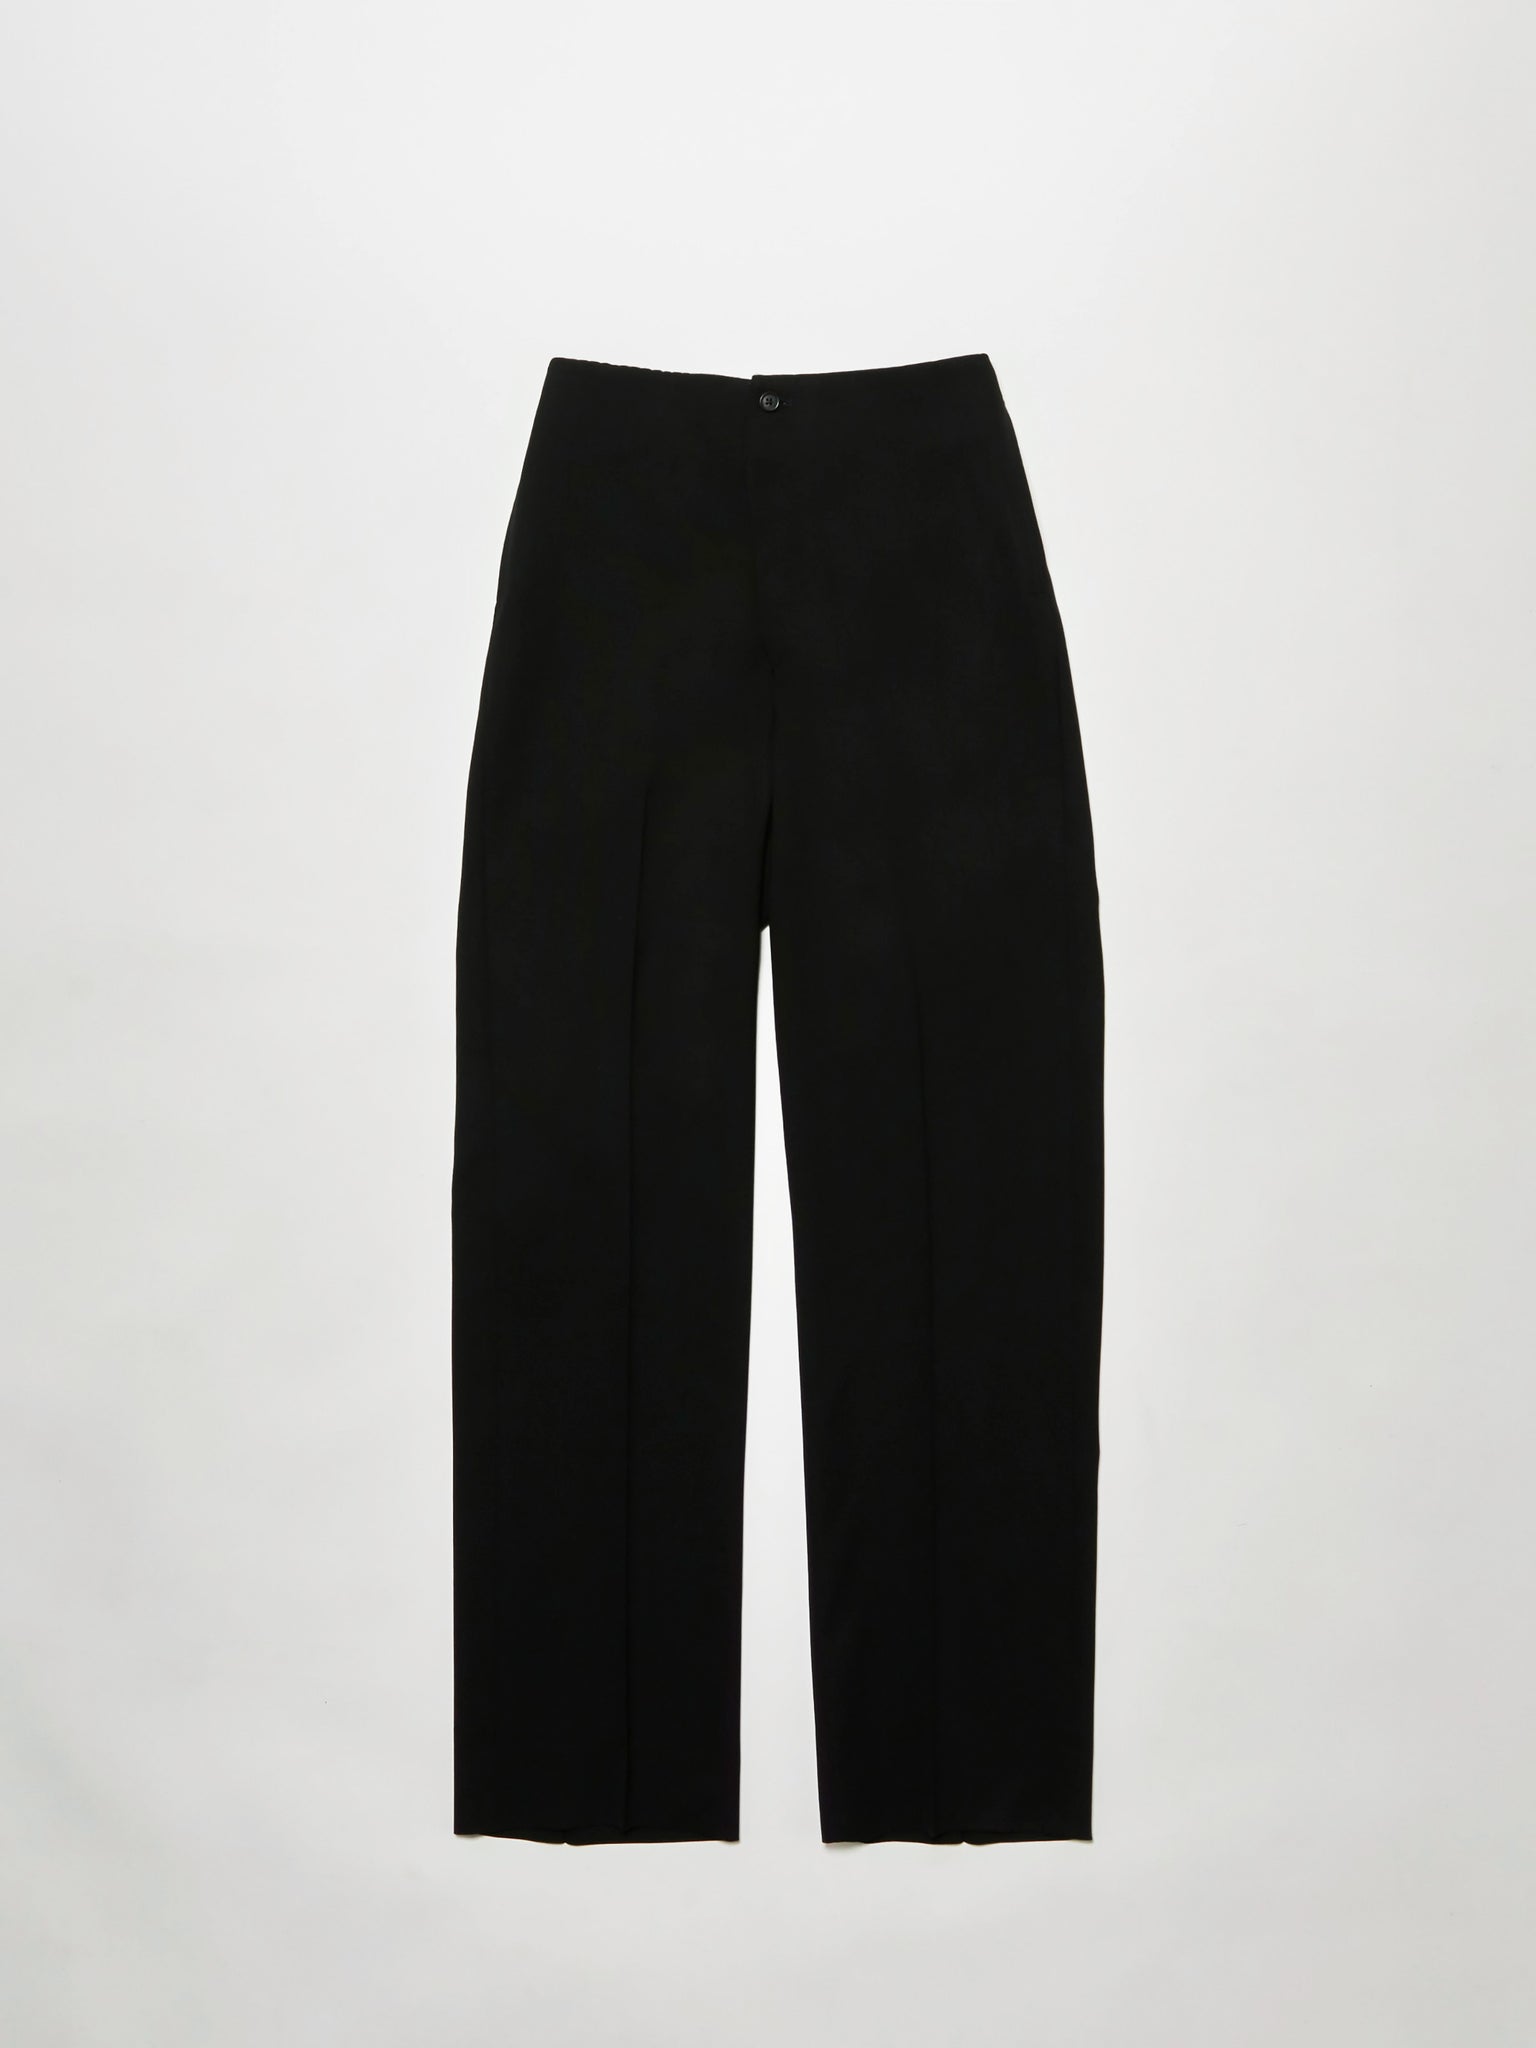 a pleated suiting trouser - black